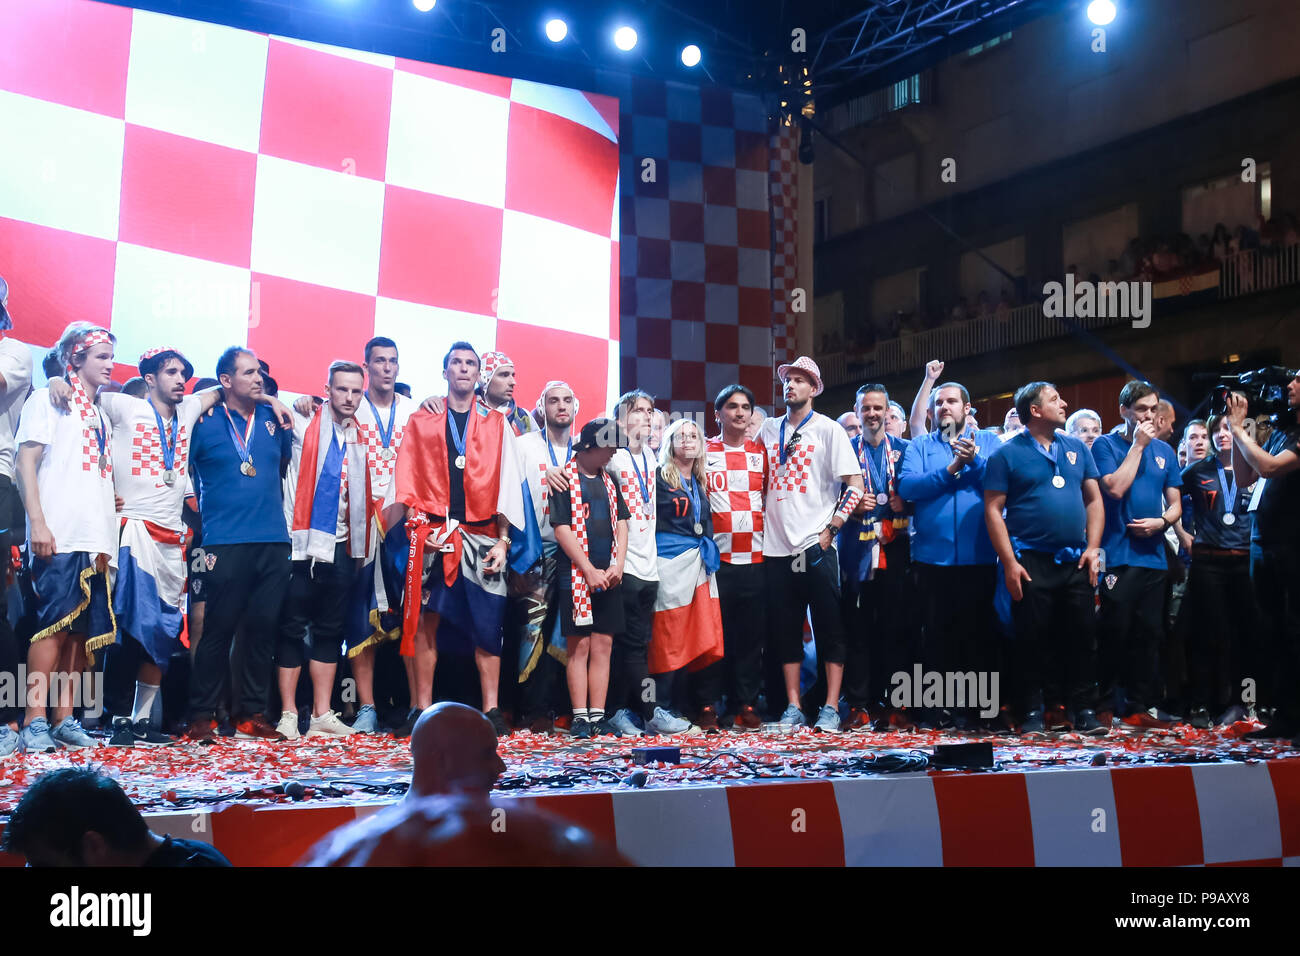 Zagreb, Croatia. 16th July, 2018. Welcome ceremony of Croatian football national team that won 2nd place, silver medal on Fifa World Cup 2018 on Ban Jelacic Square in Zagreb, Croatia. Croatian football national team celebrating on the stage. Credit: Goran Jakuš/Alamy Live News Stock Photo